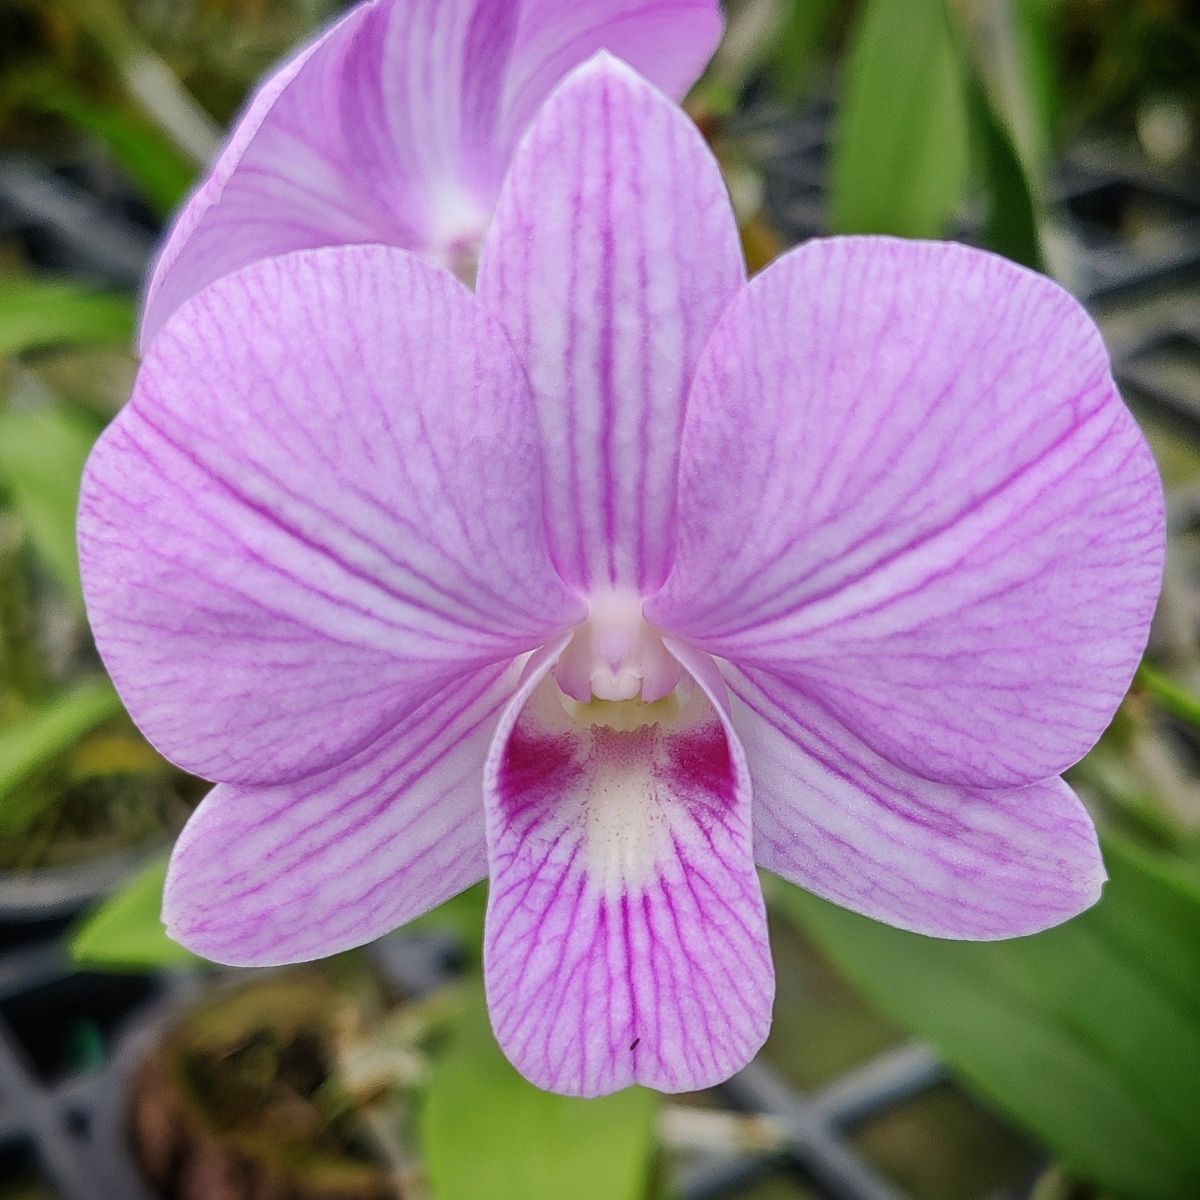 Dendrobium Burana Pinky Orchid - Exquisite Blooms for a Stunning Floral Display